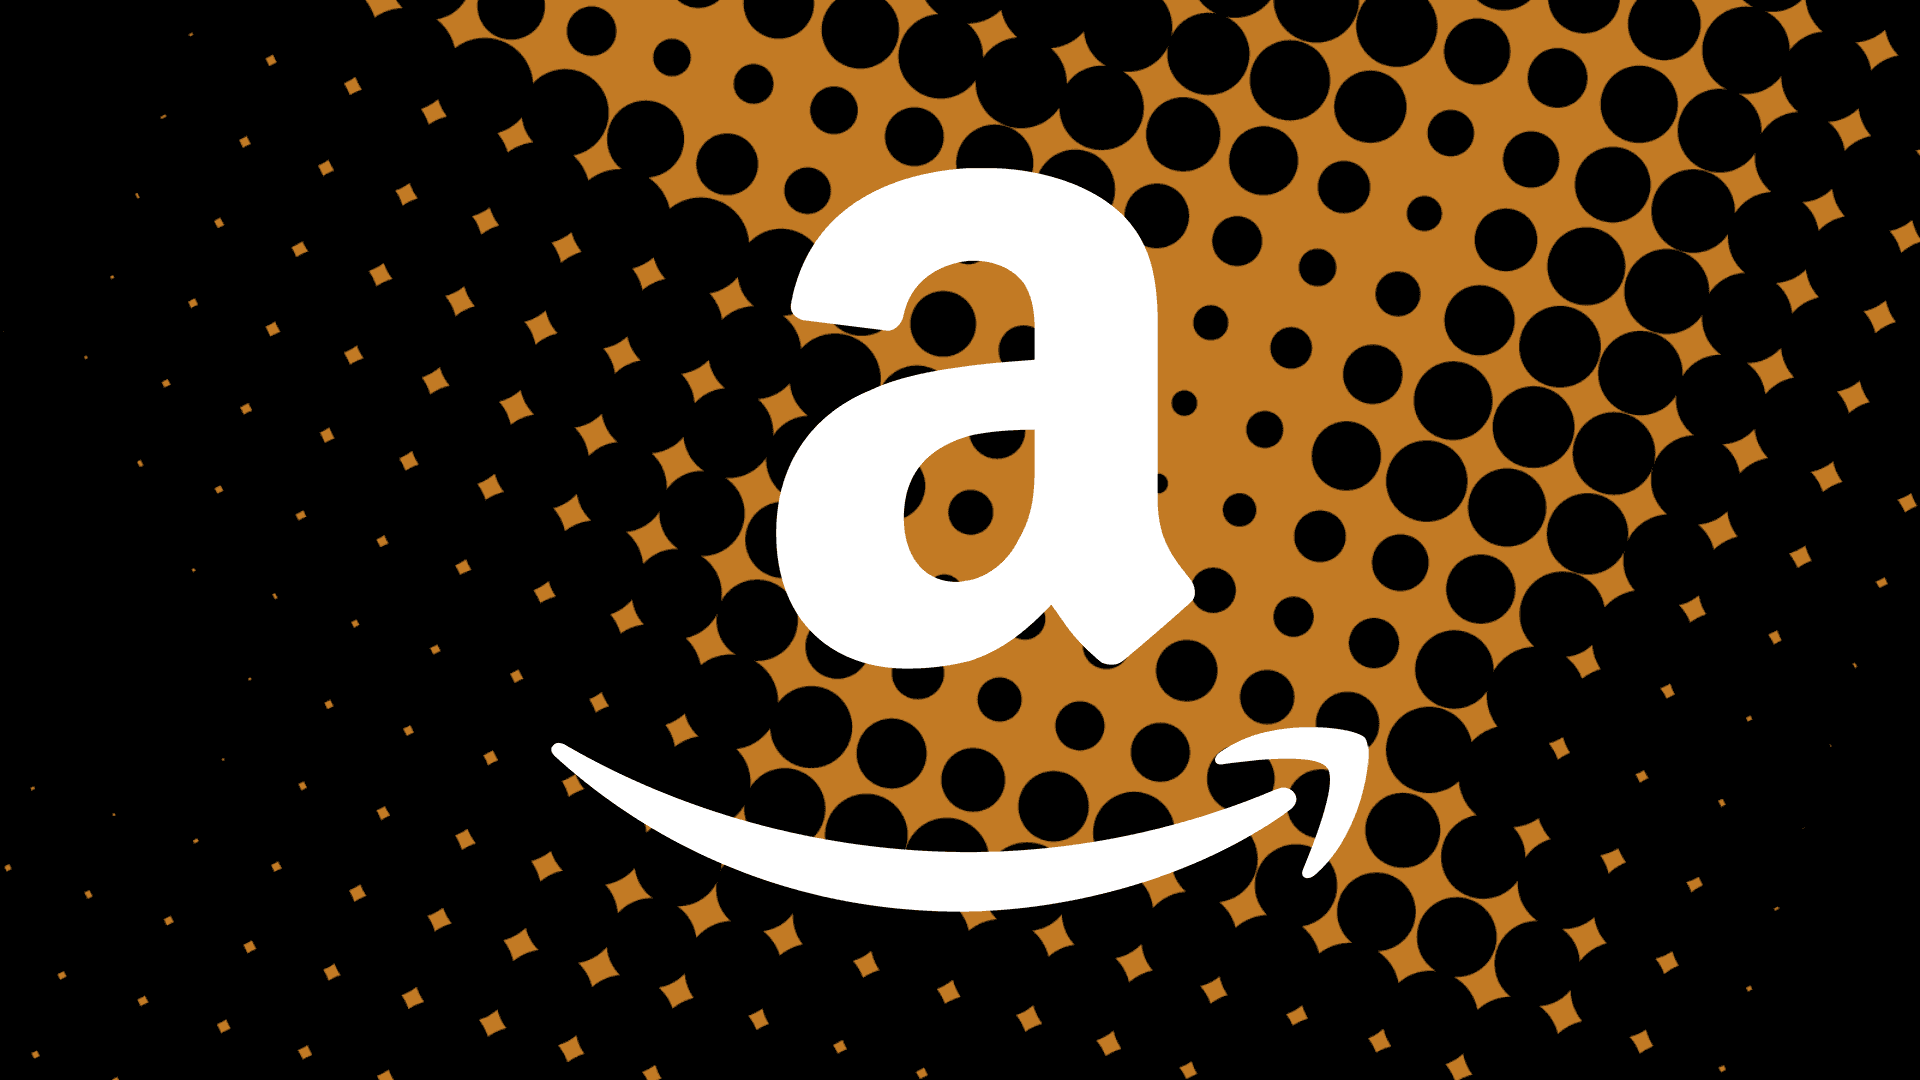 Shop Amazon Prime and get free shipping on millions of products